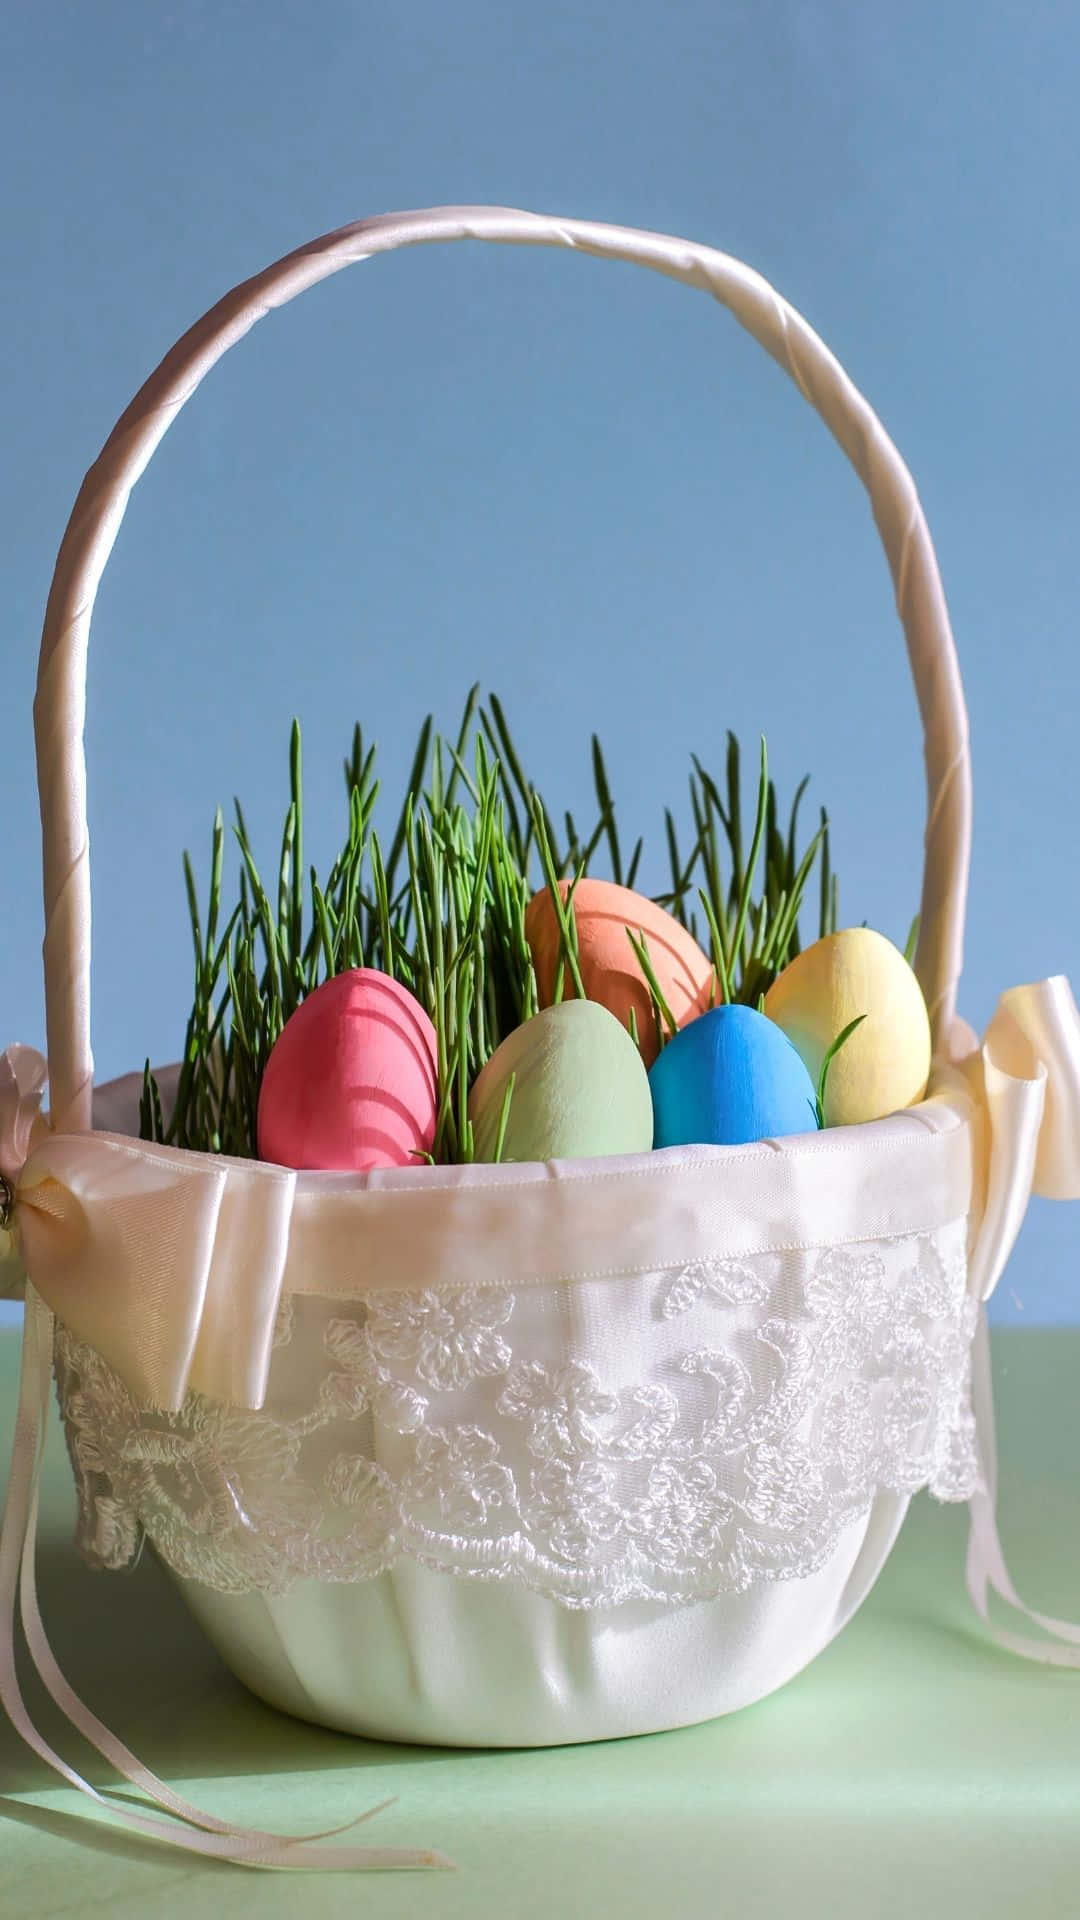 Easter Basket With Colored Eggs And Grass Wallpaper